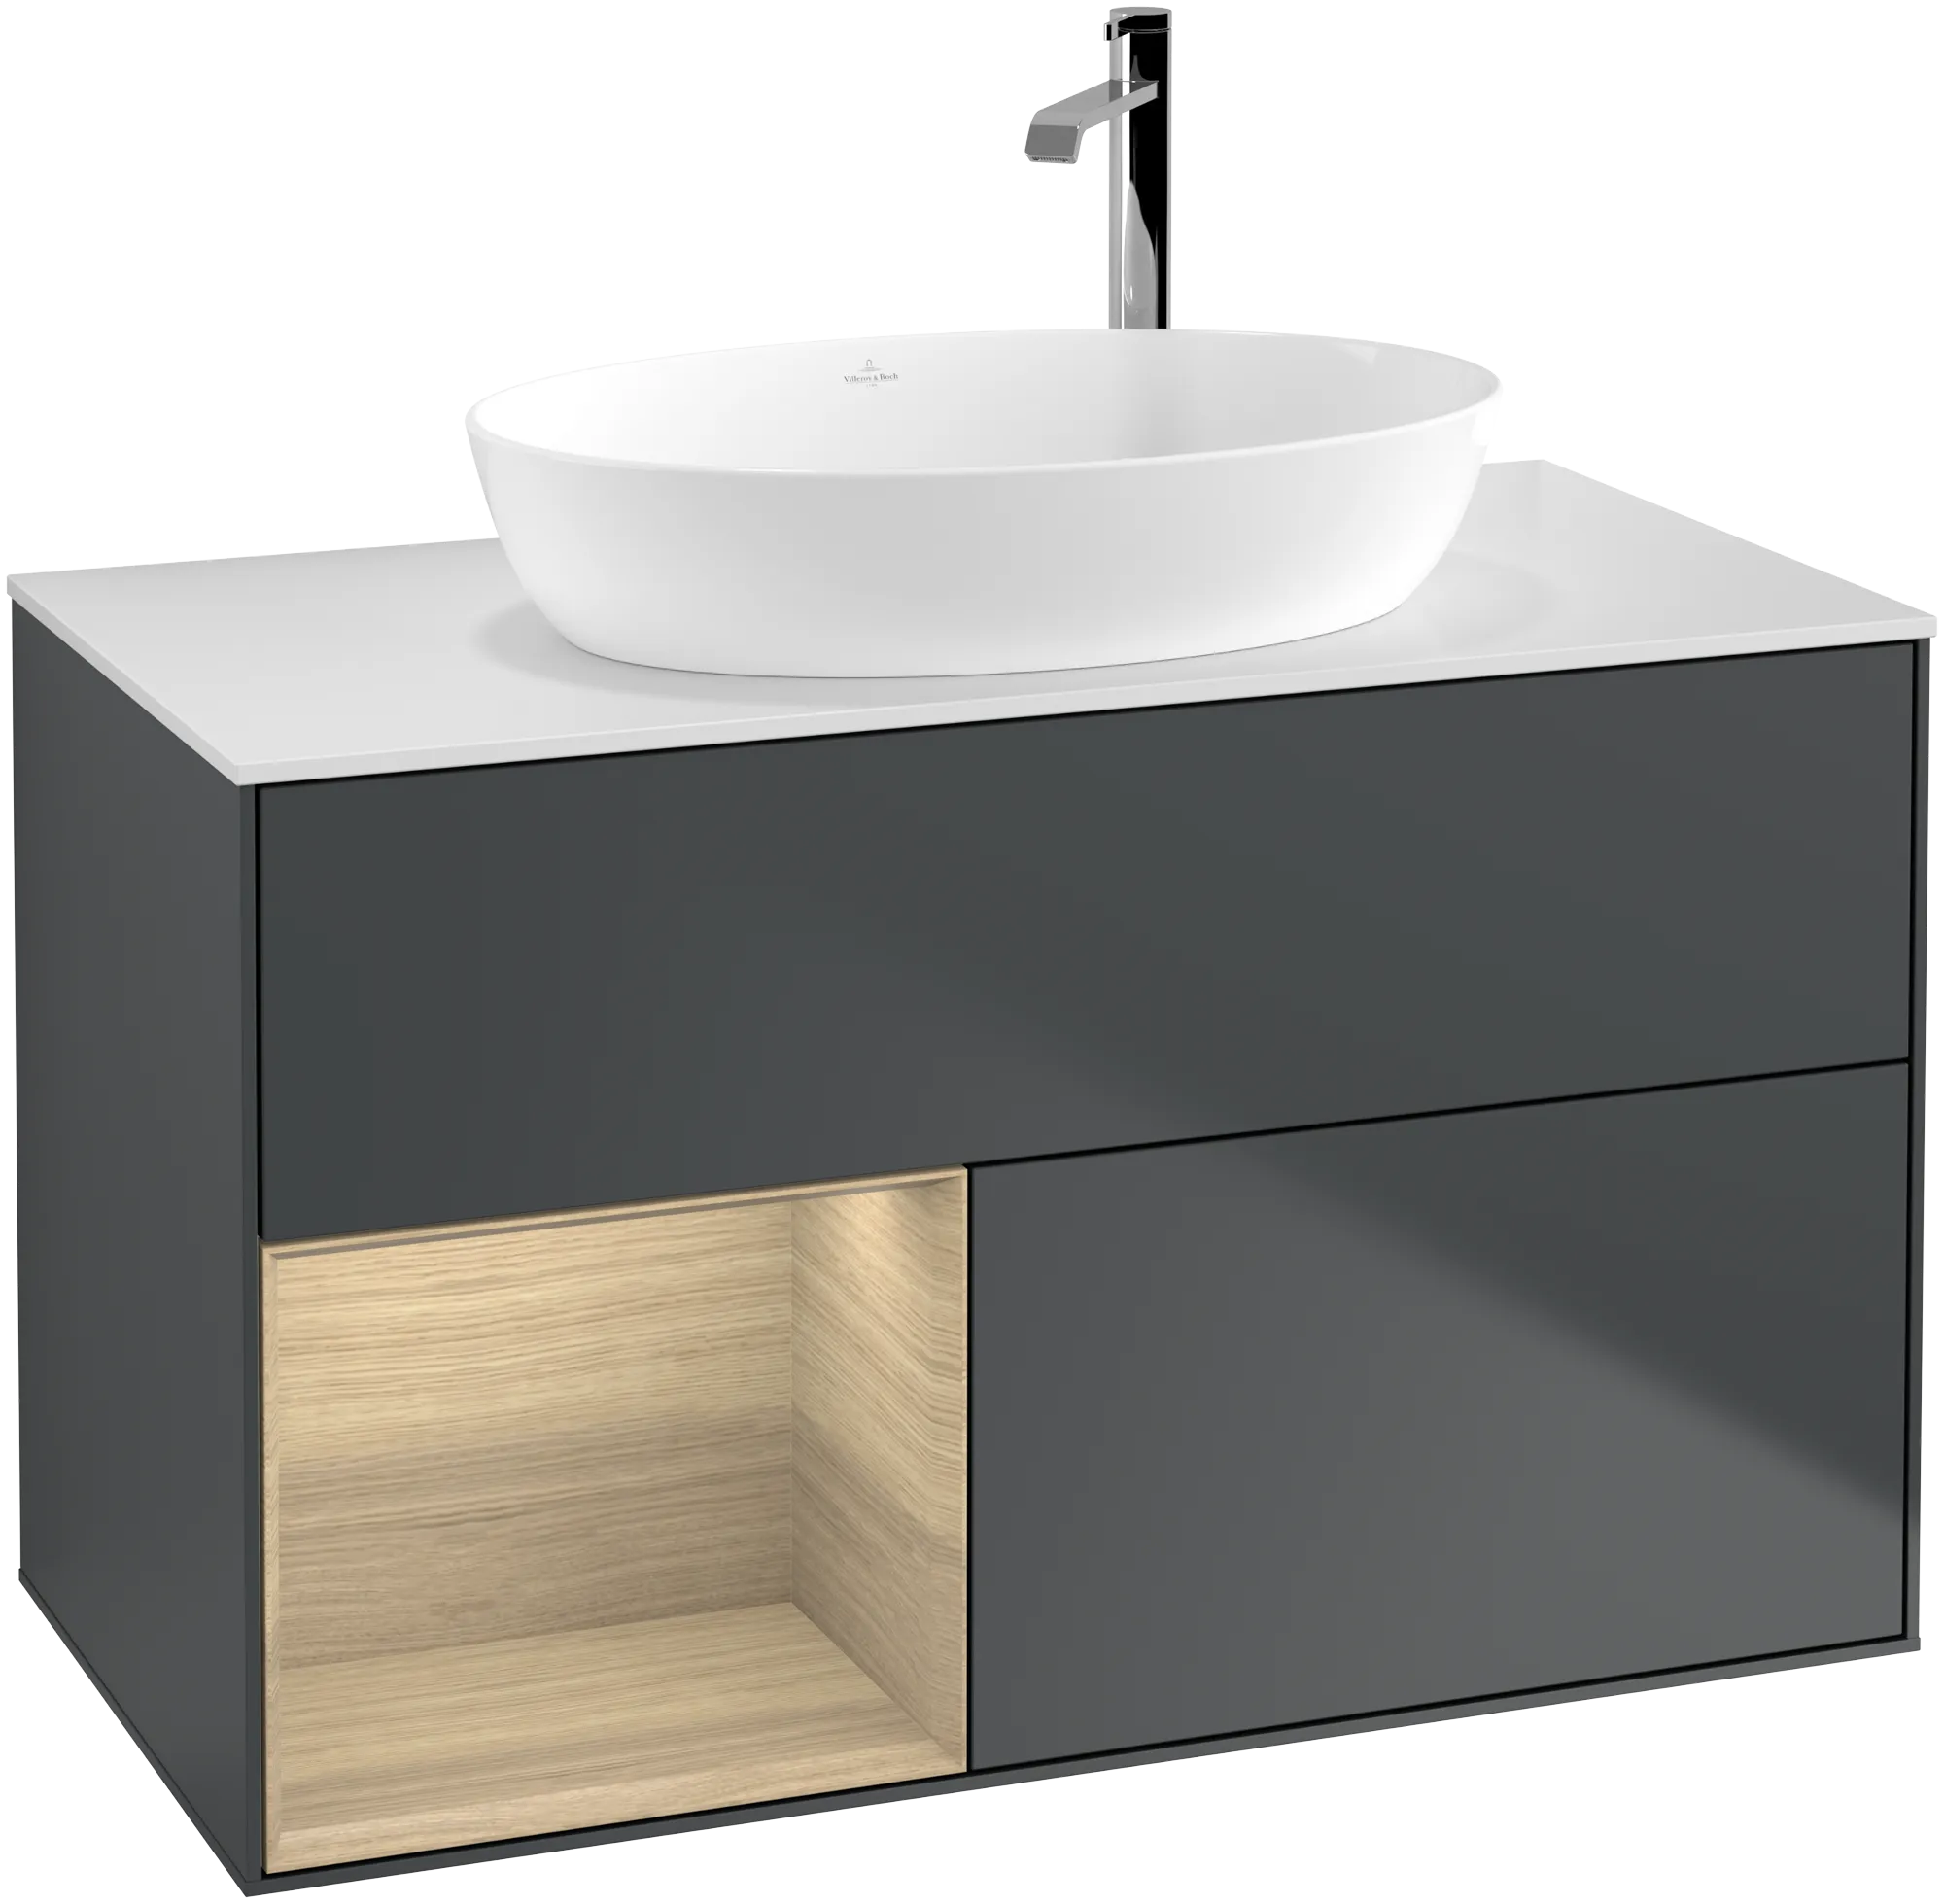 Picture of VILLEROY BOCH Finion Vanity unit, with lighting, 2 pull-out compartments, 1000 x 603 x 501 mm, Midnight Blue Matt Lacquer / Oak Veneer / Glass White Matt #G891PCHG